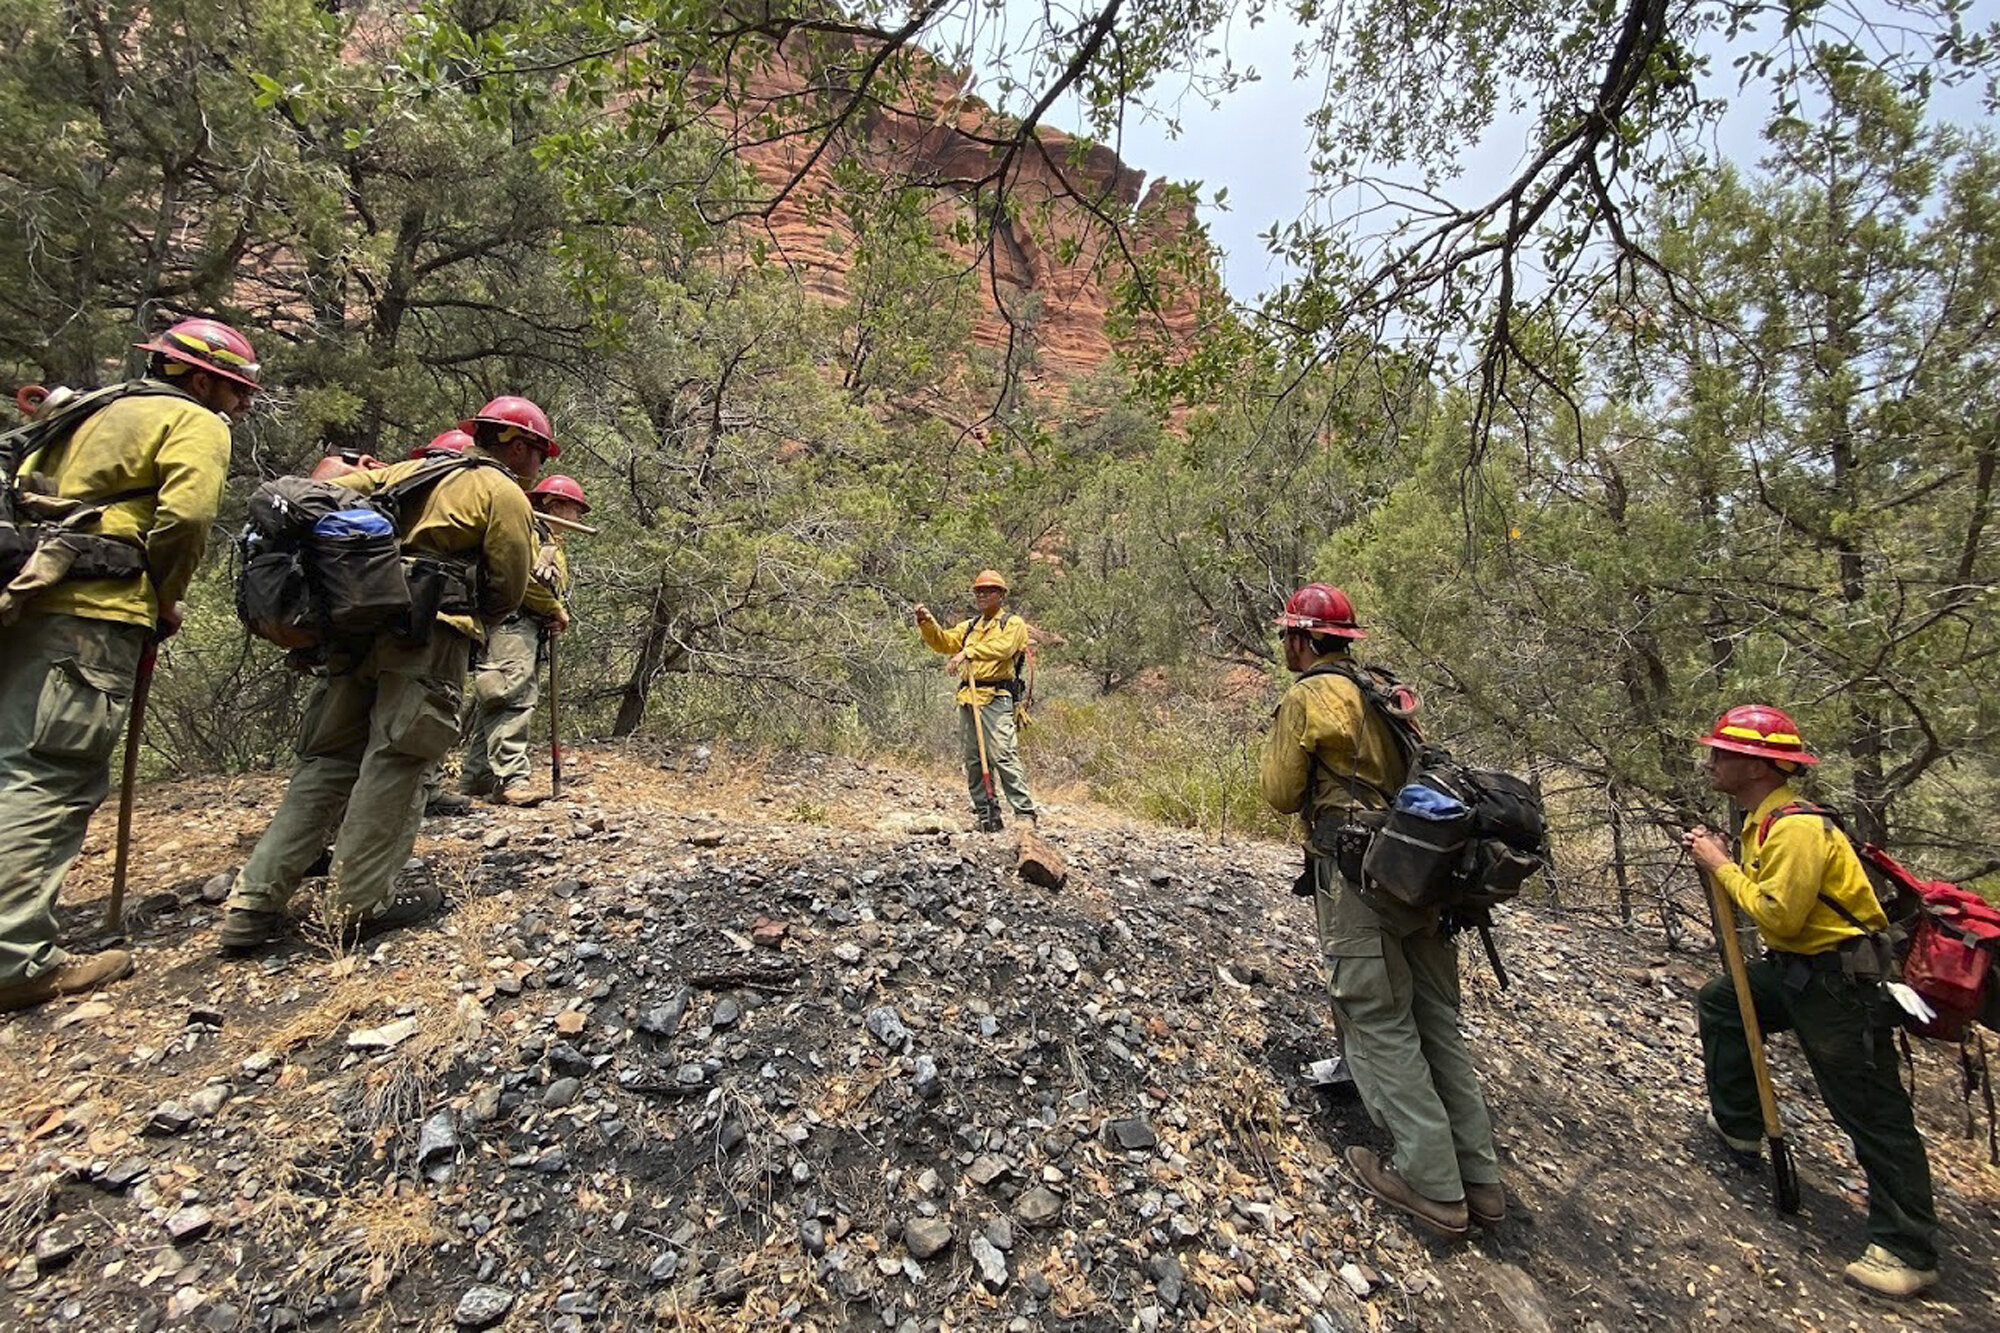 #Arizona fires sweep land rich with ancient sites, artifacts